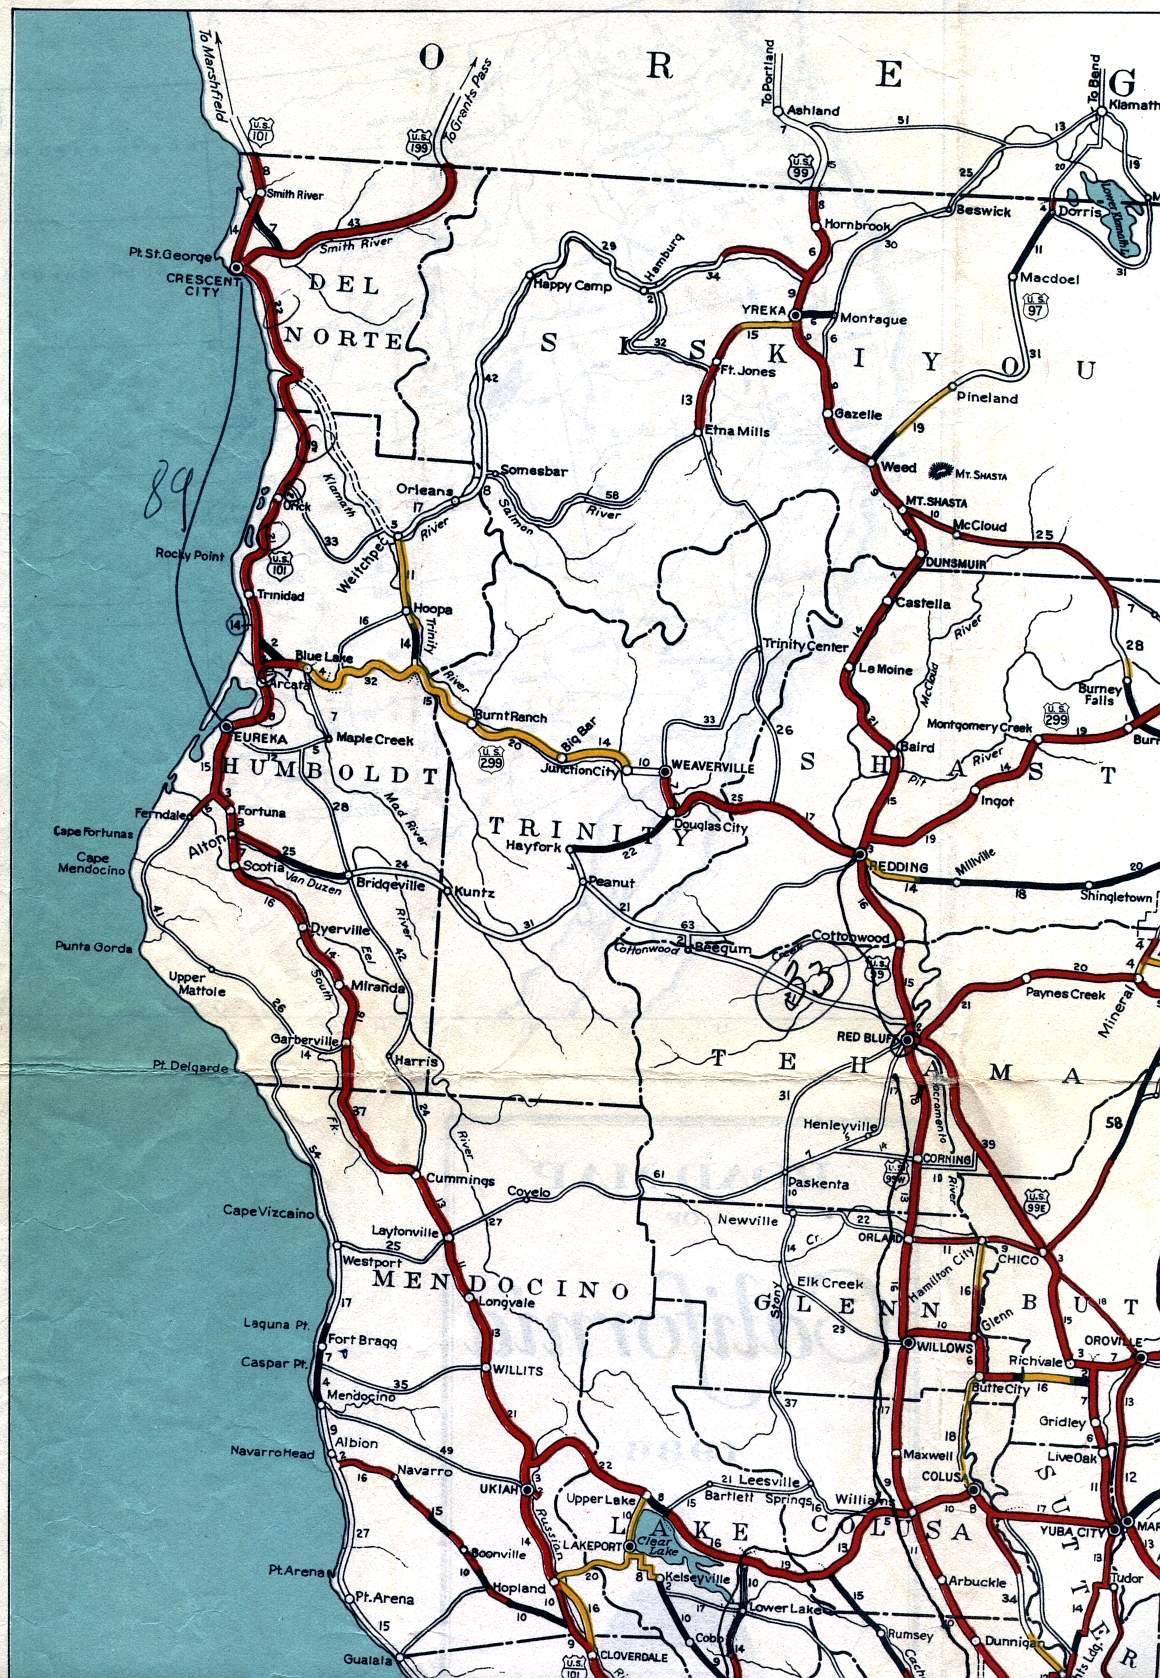 Northwestern California on the 1936 California official highway map